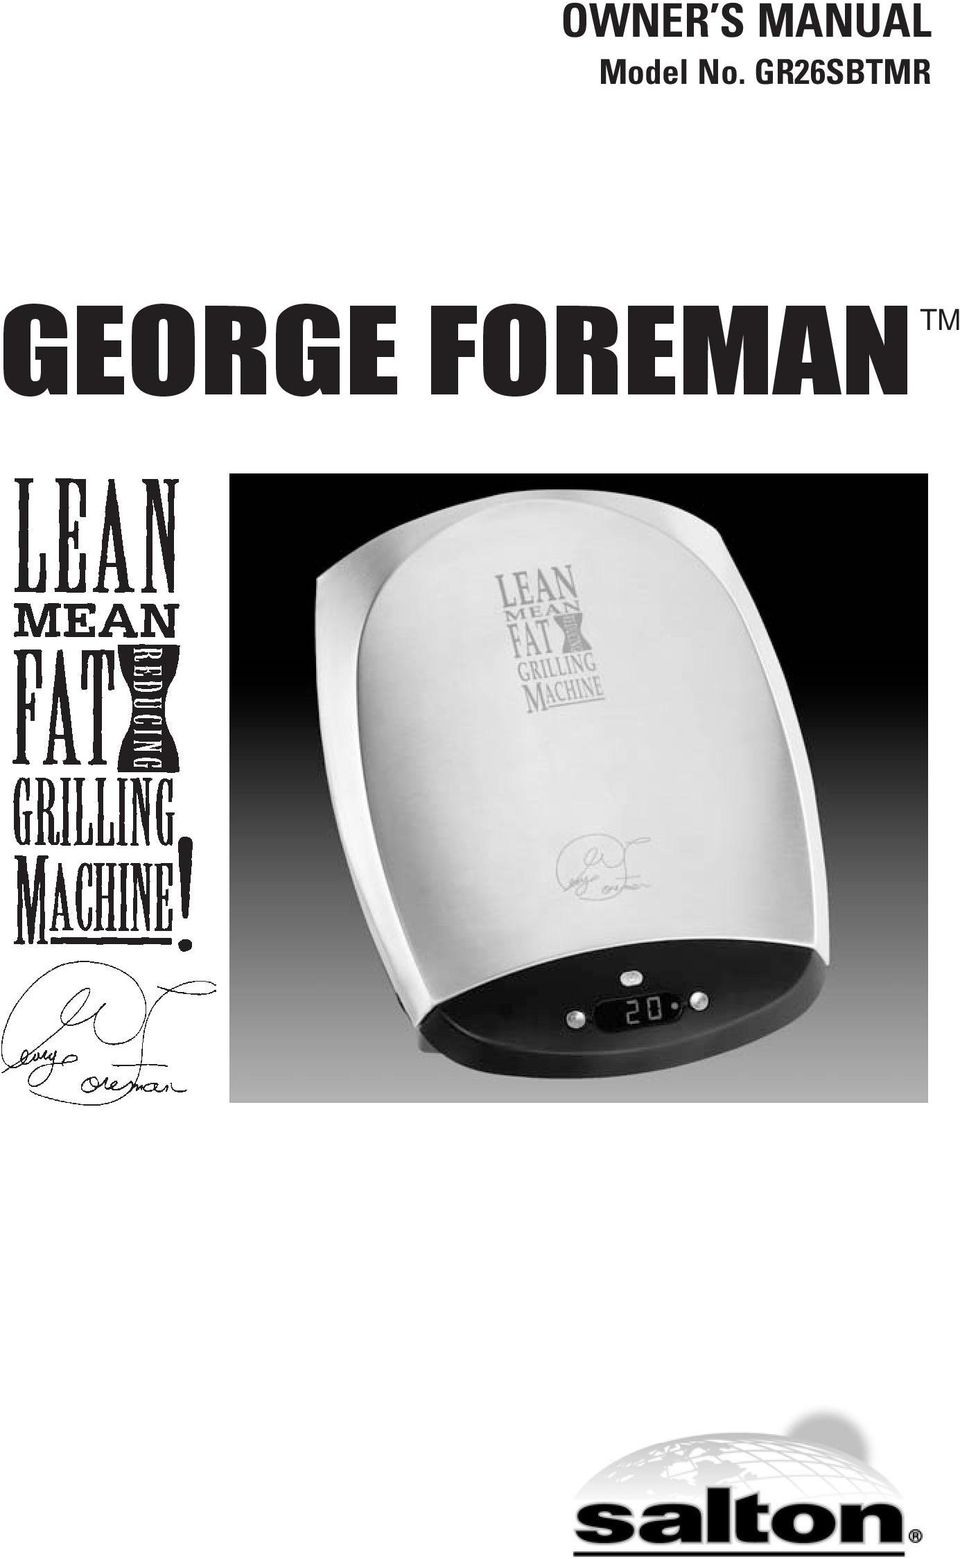 George foreman lean mean fat grilling machine owner's manual